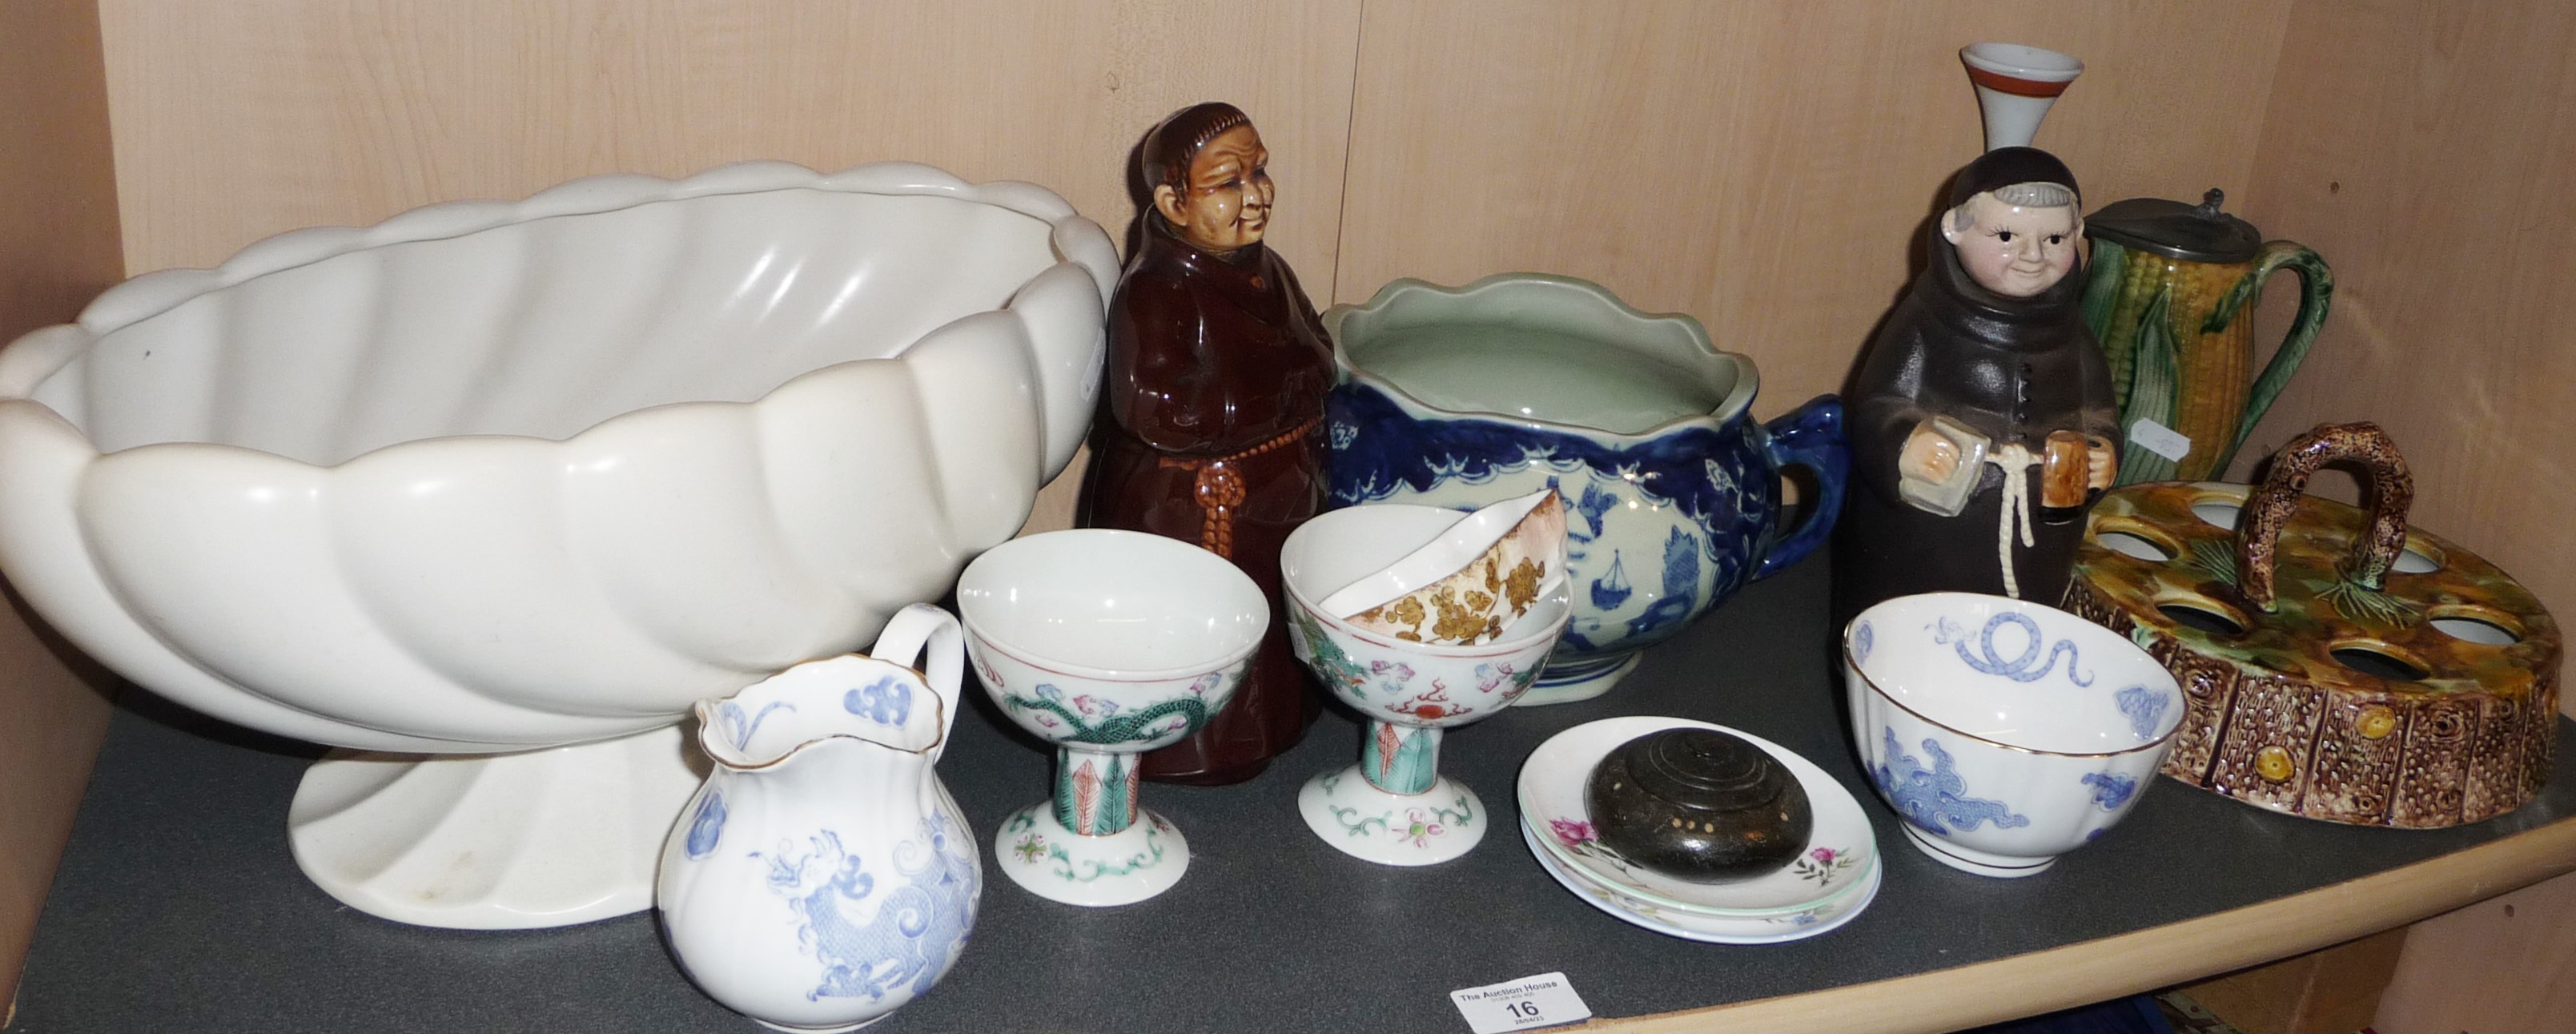 Assorted porcelain and pottery inc. Royal Worcester, a Majolica egg stand, etc.